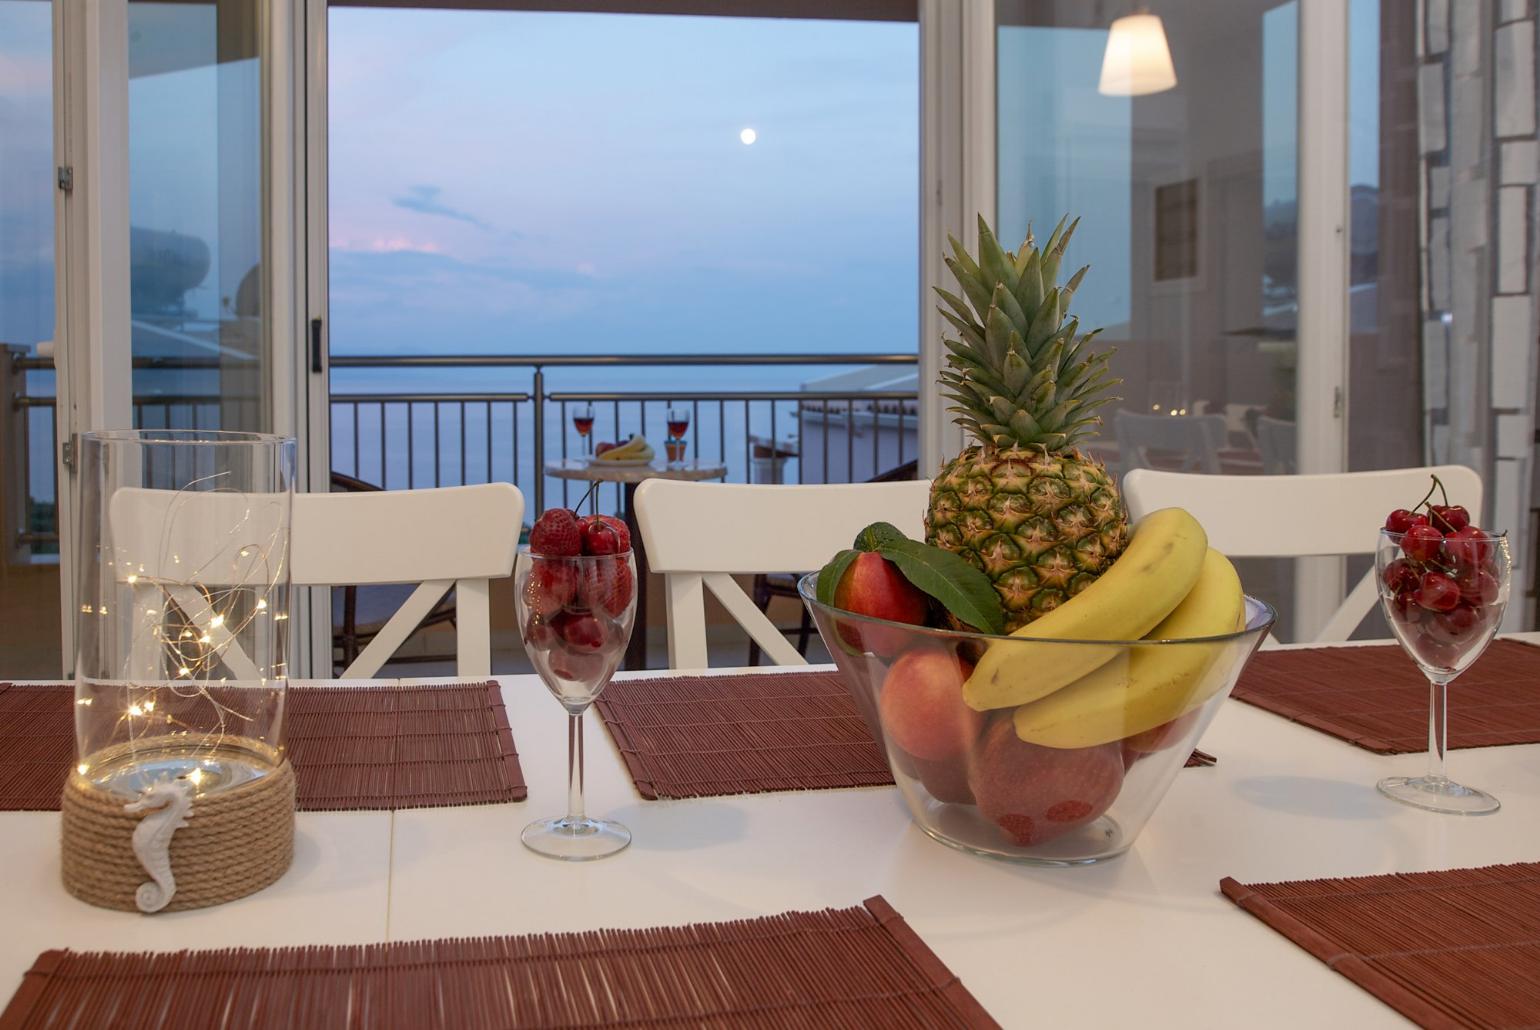 Dining room with A/C and balcony access with panoramic sea views